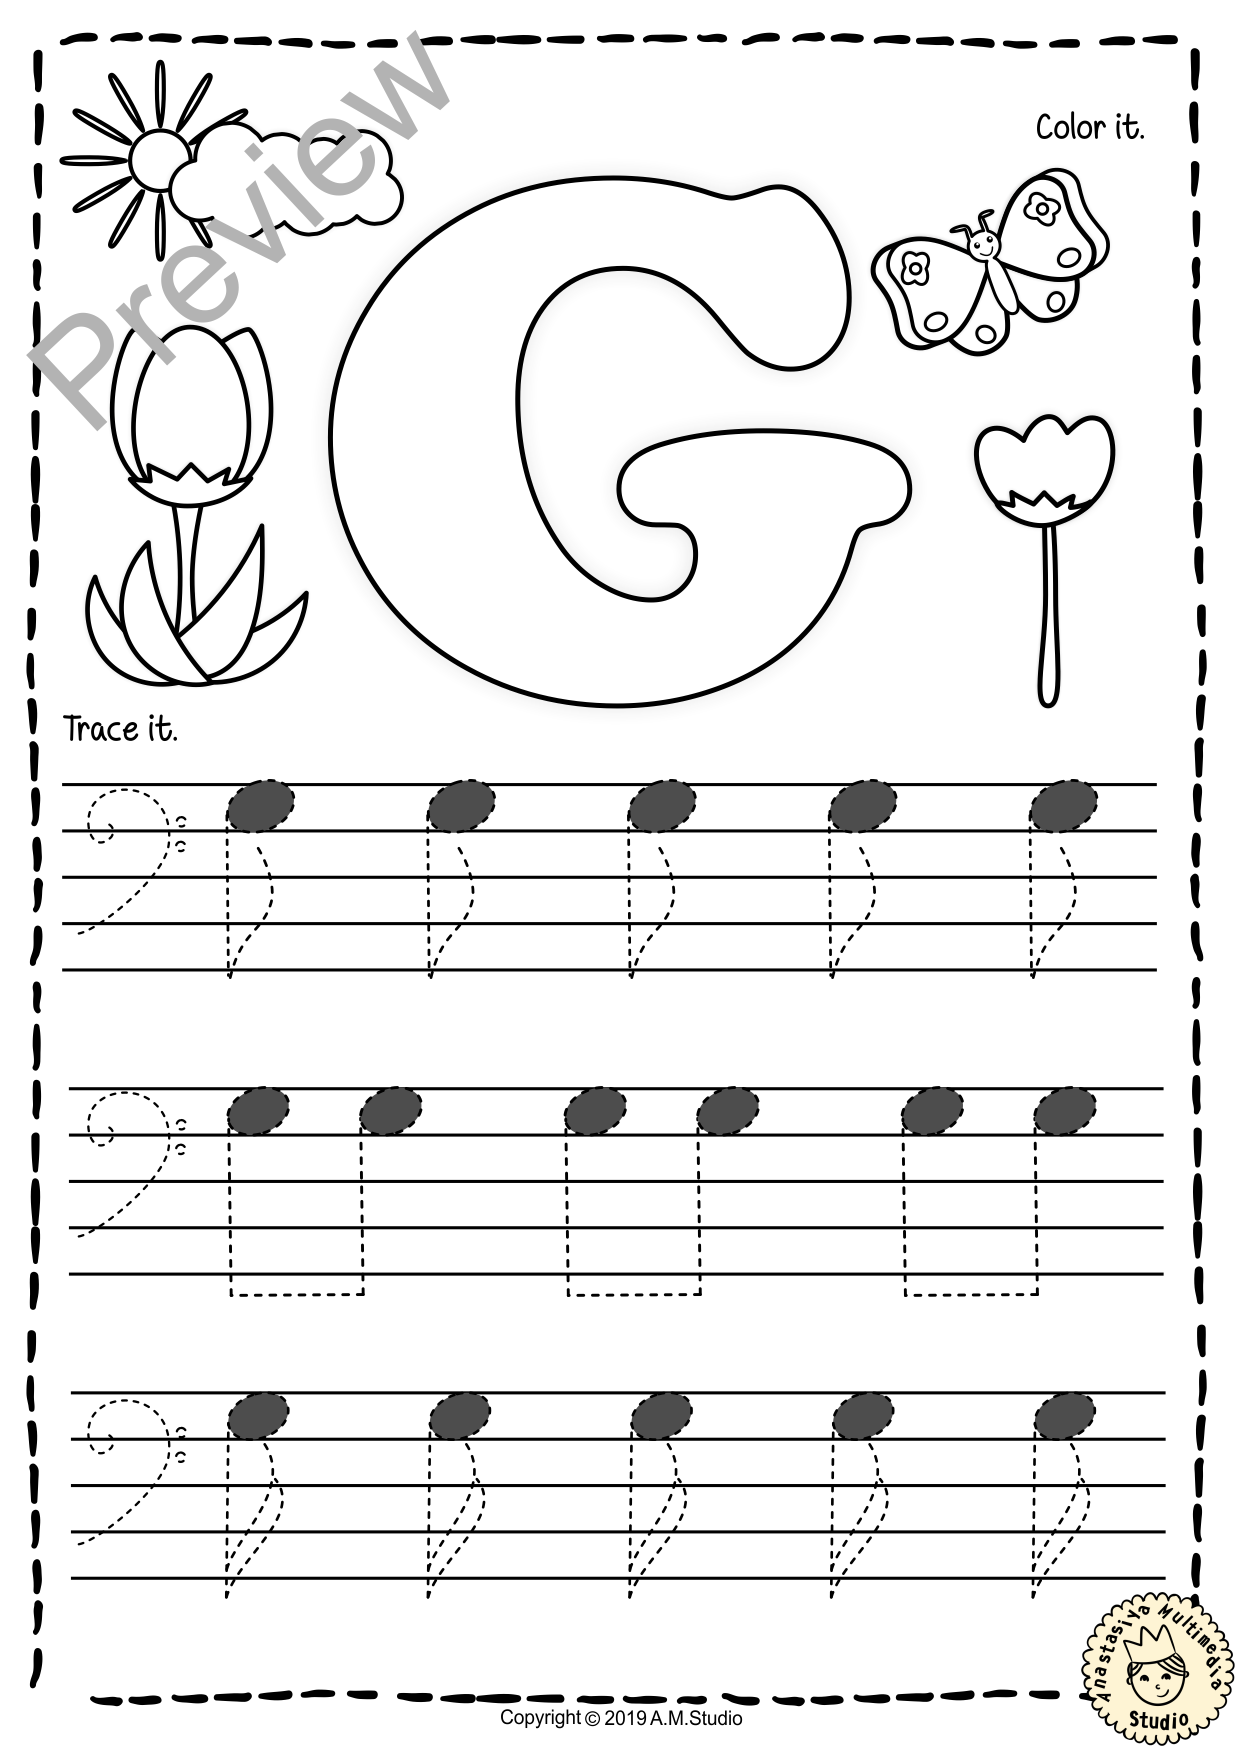 Bass Clef Tracing Music Notes Worksheets for Spring (img # 2)